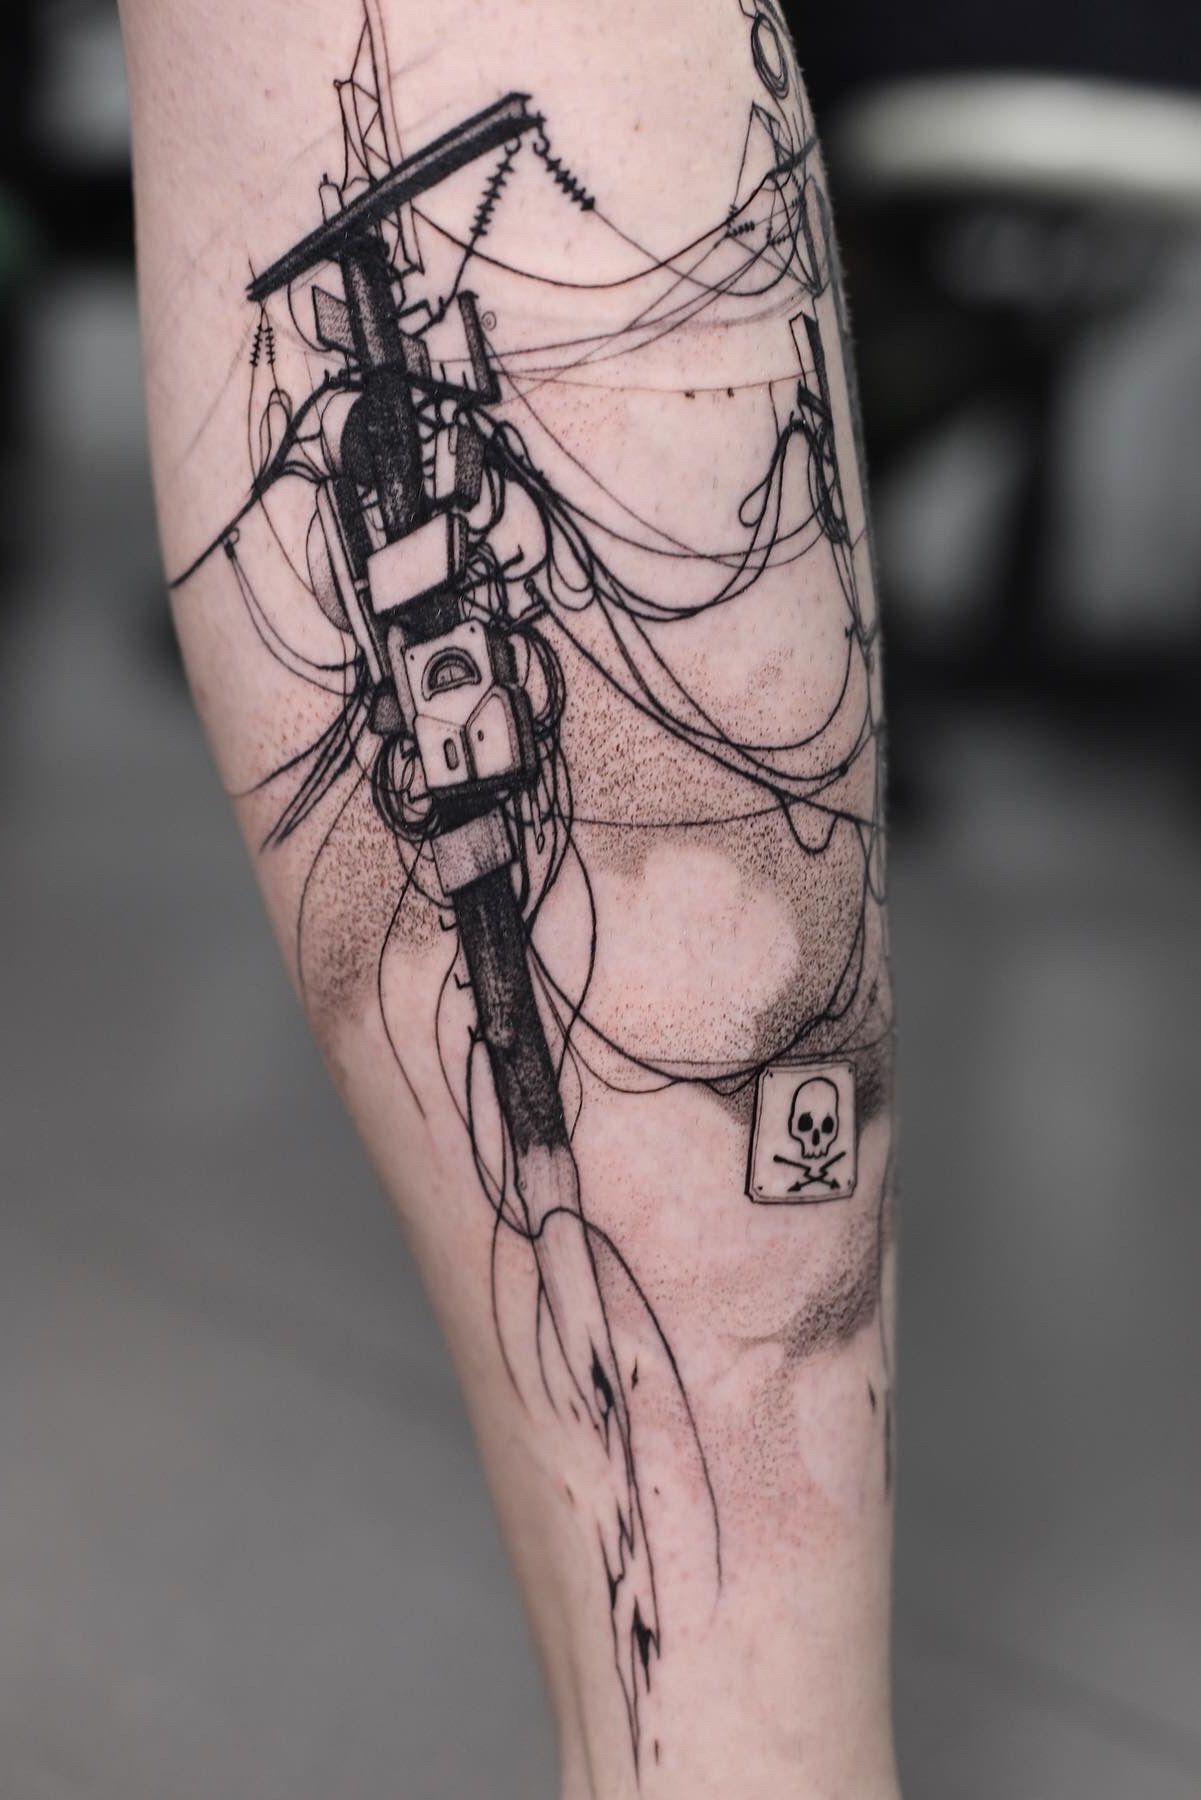 Modern Electric Tattoo Company modernelectrictattoocompany   Instagram photos and videos